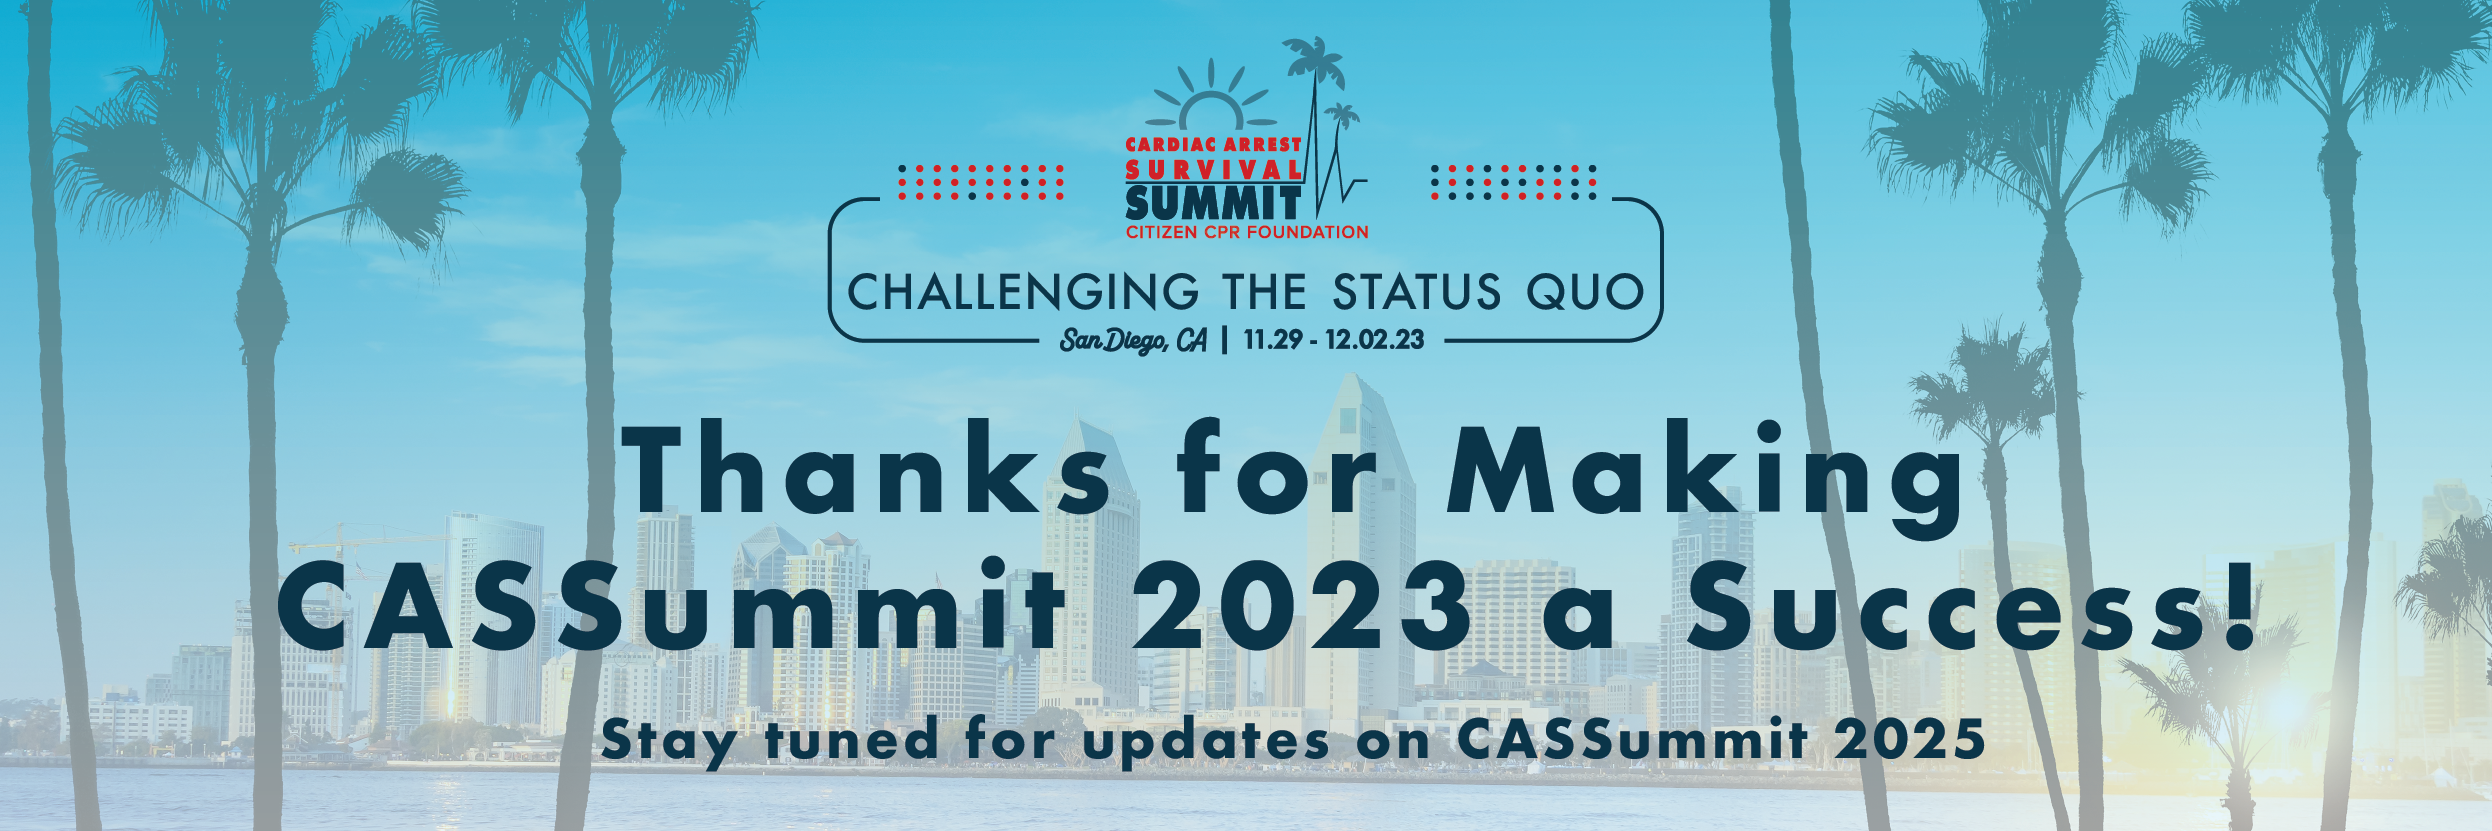 A banner image with palm trees and text that thanks attendees for making CASSummit 2023 a success.